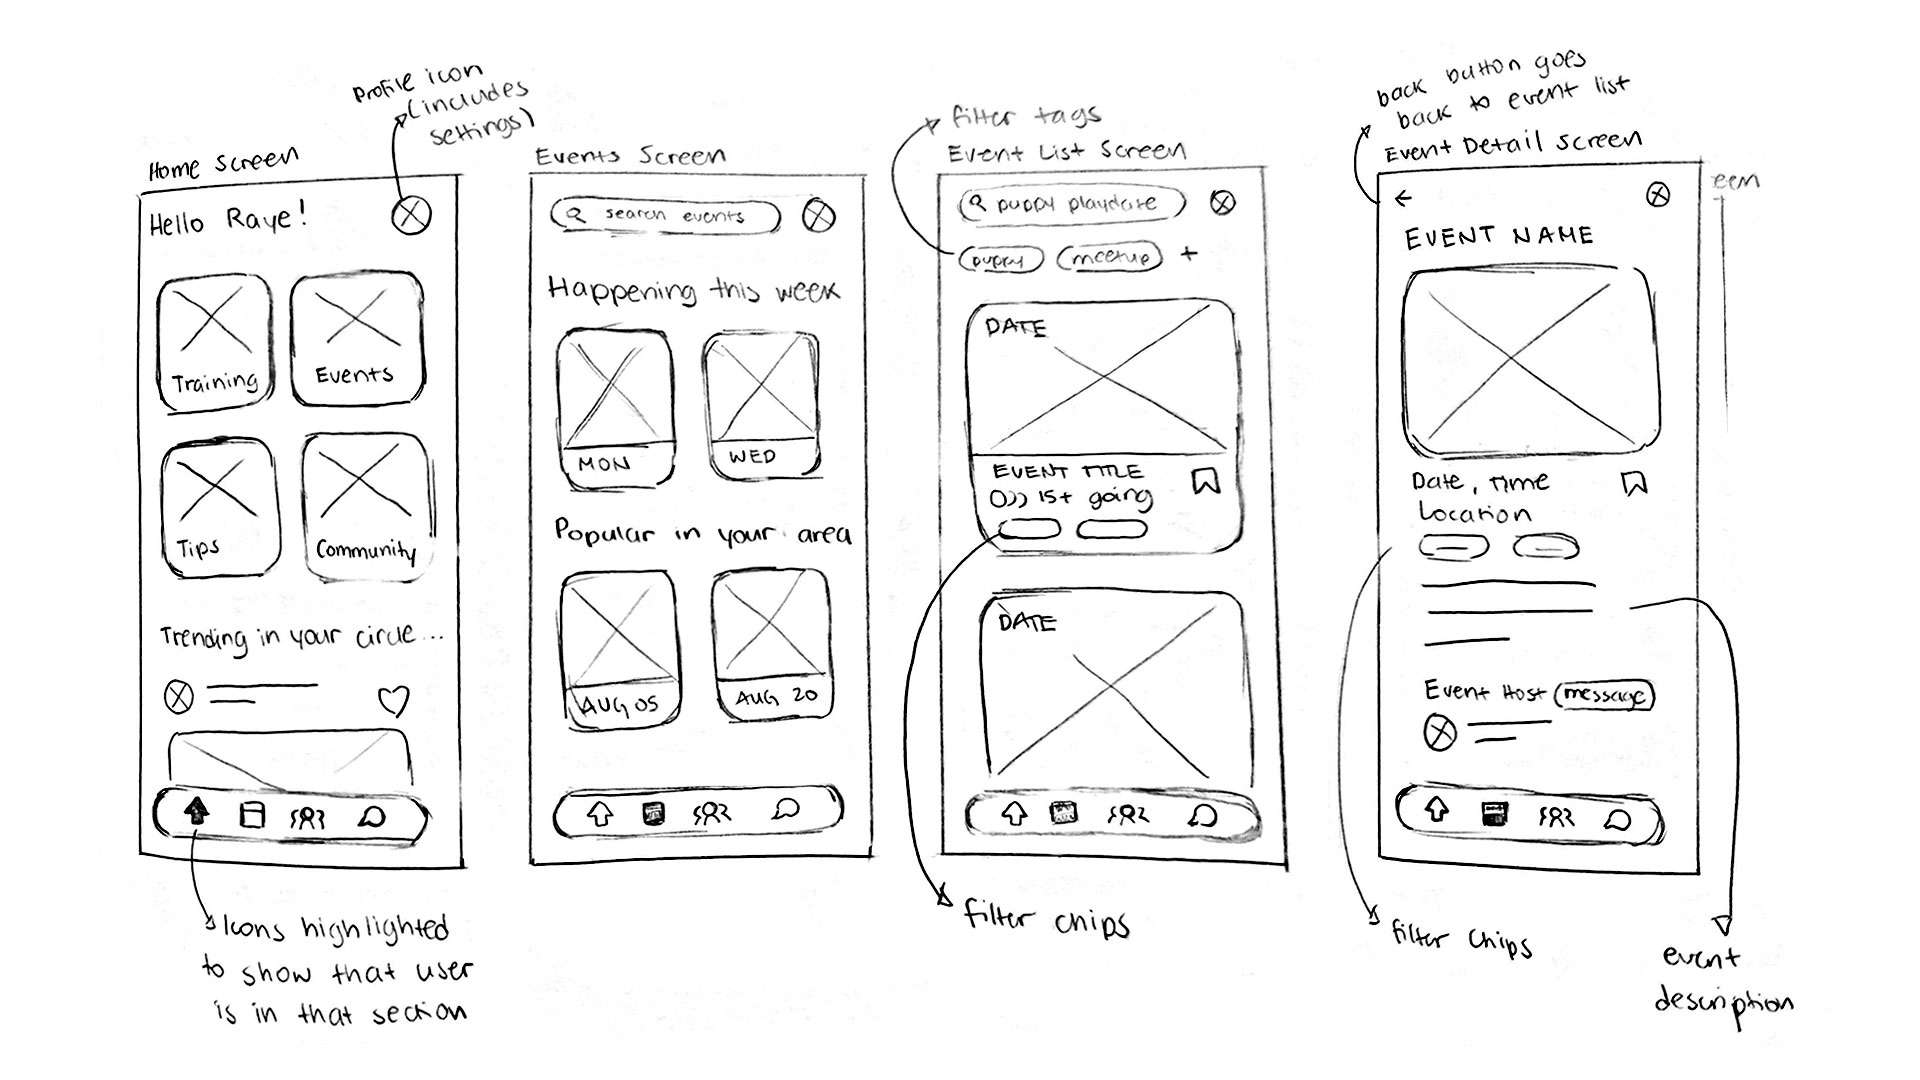 bowwow-images_wireframe-solution-sketches-edited_01